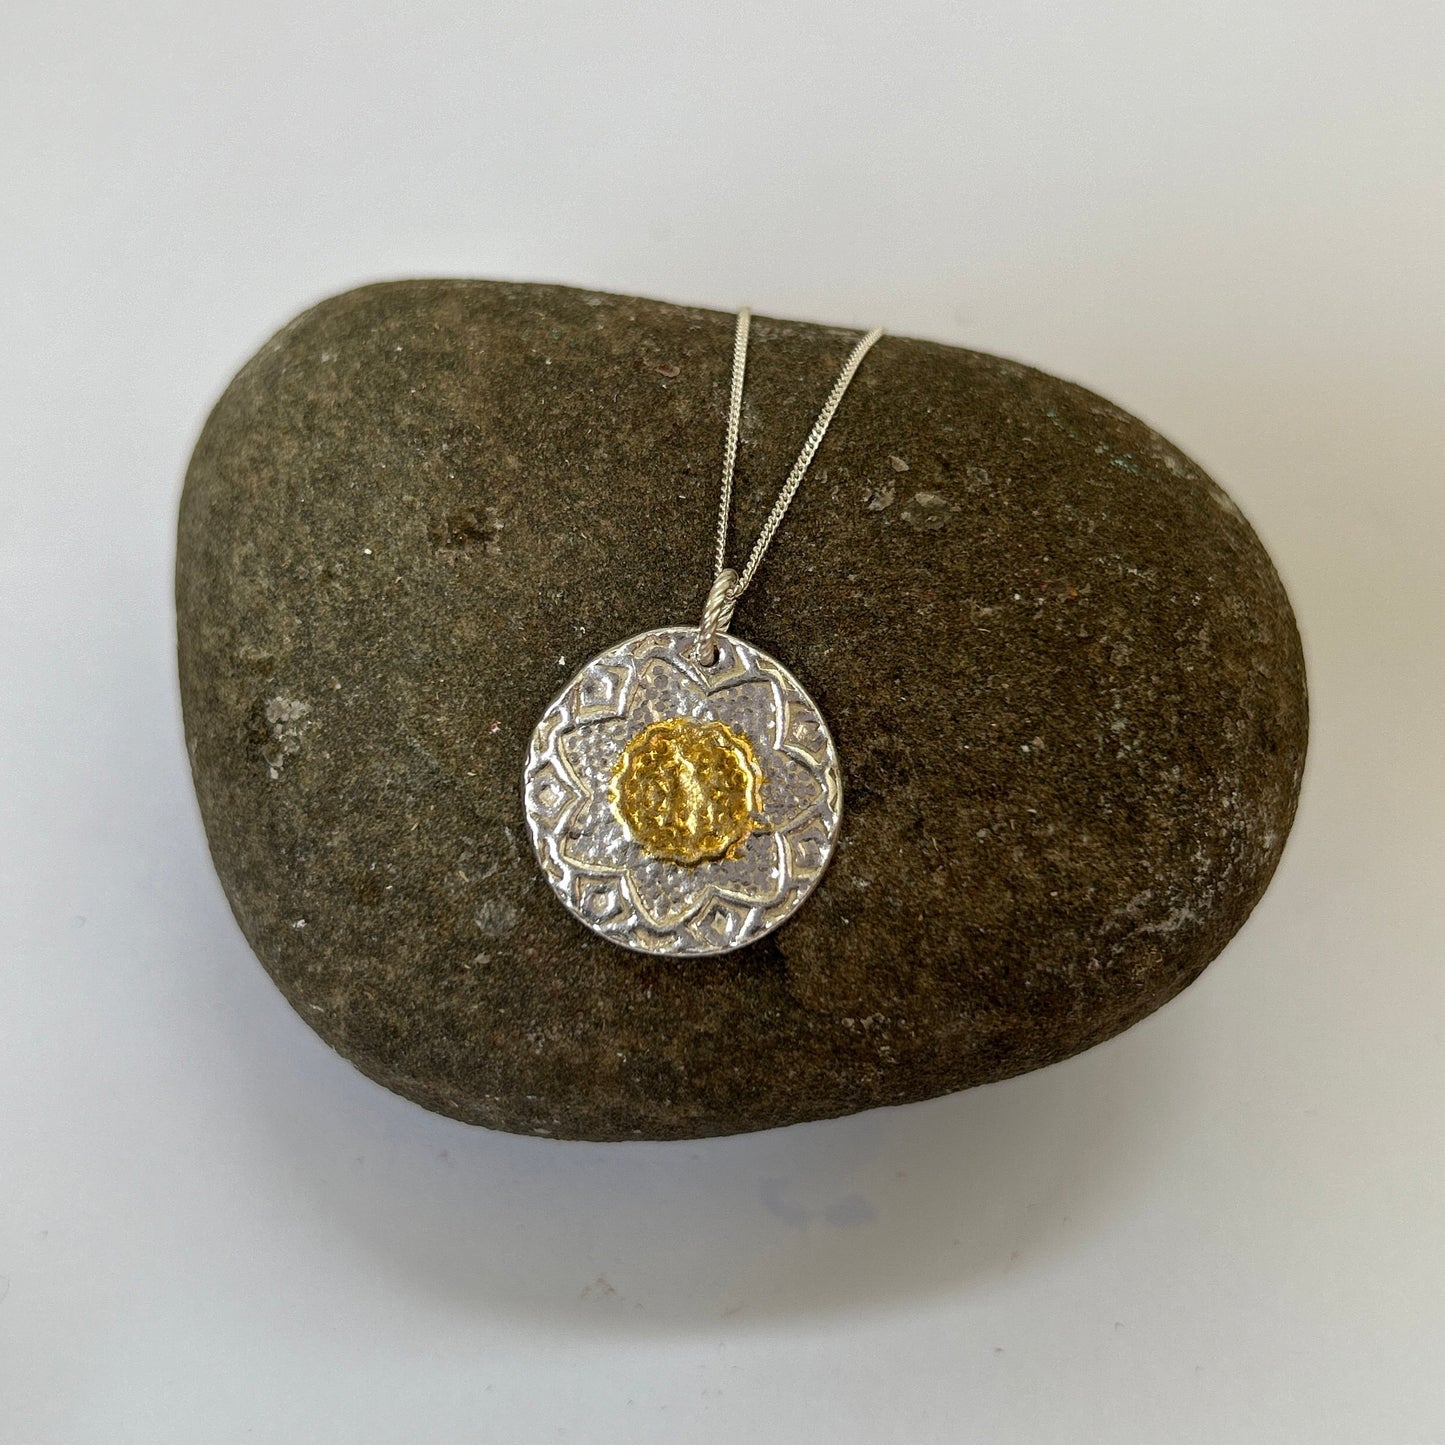 Silver and gold Patterned Necklace - Silver Lines Jewellery